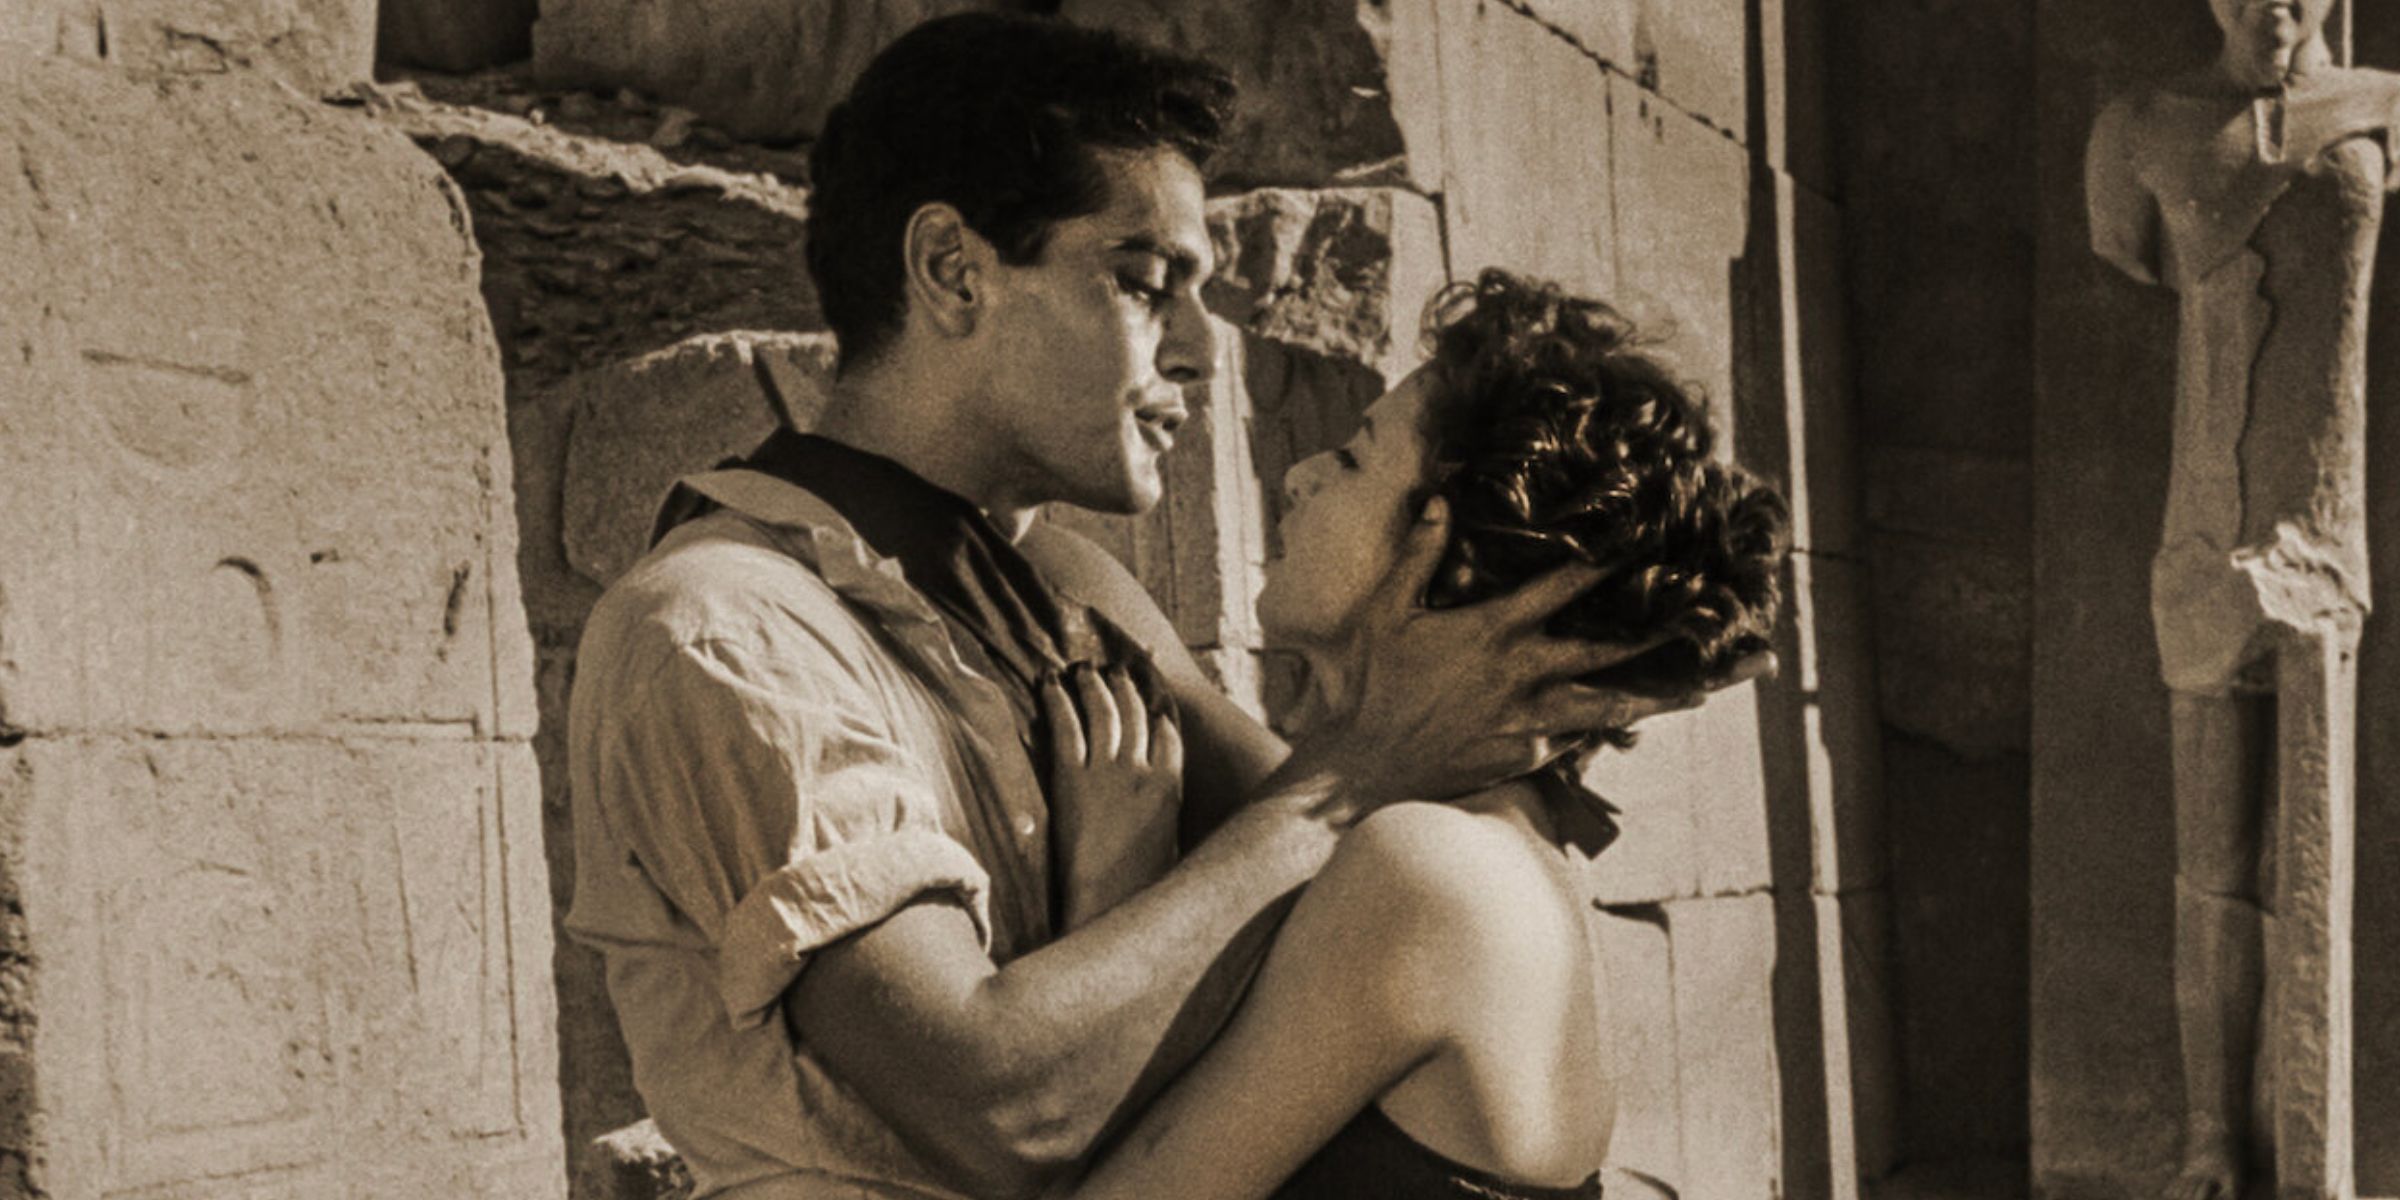 A man and woman embracing in front of Egyptian ruins in The Blazing Sun